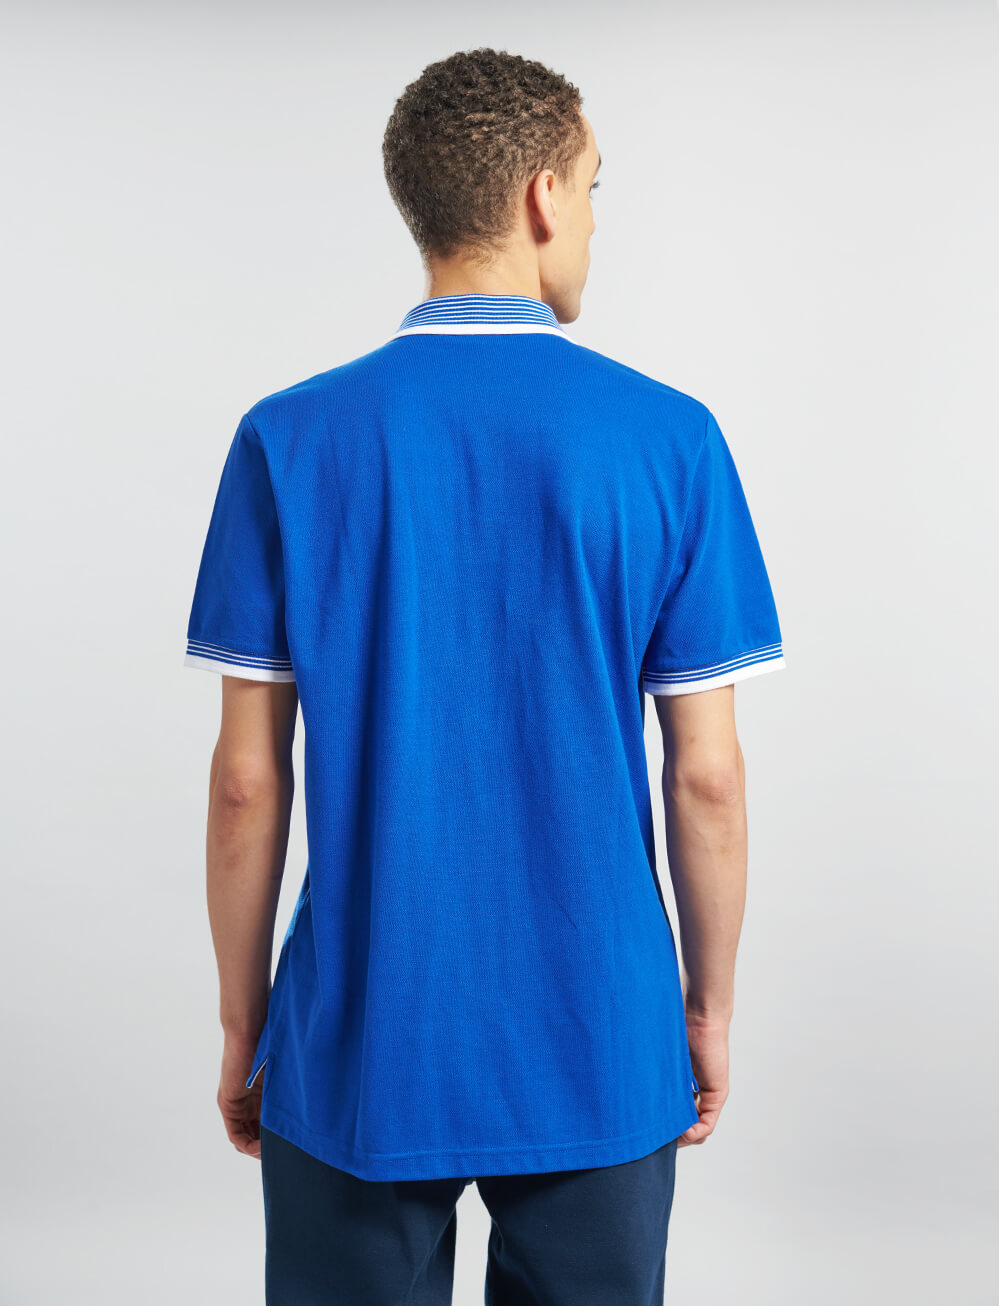 Official Chelsea Tipped Polo - Royal Blue - The World Football Store